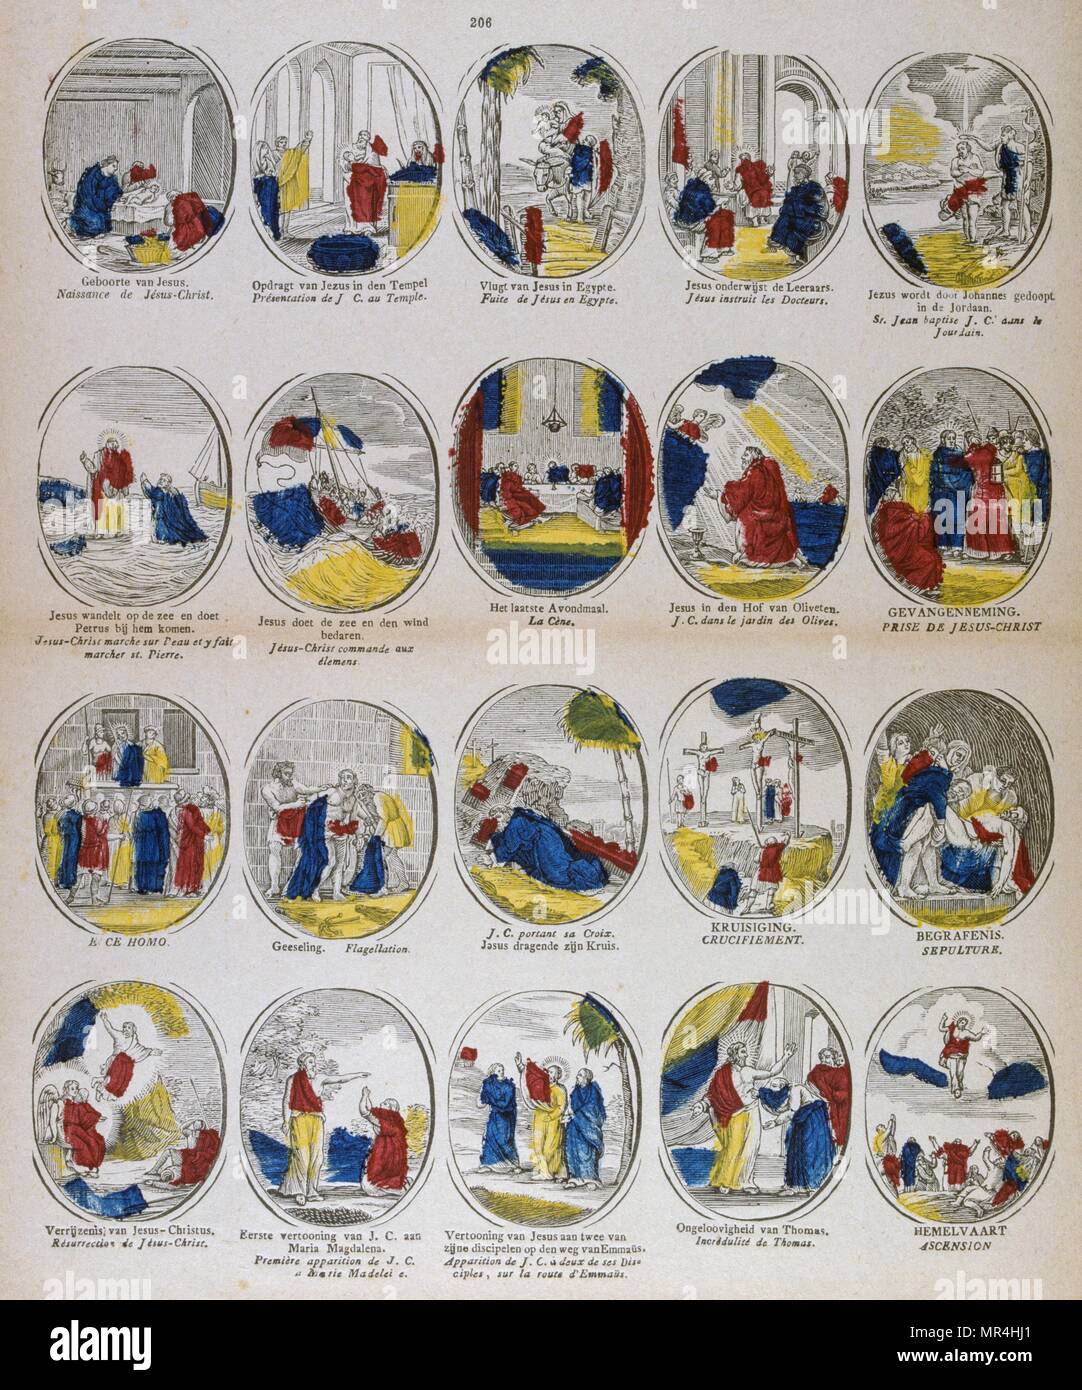 Dutch illustrated sequence on the life of Jesus Christ with French translations. 18th century Stock Photo